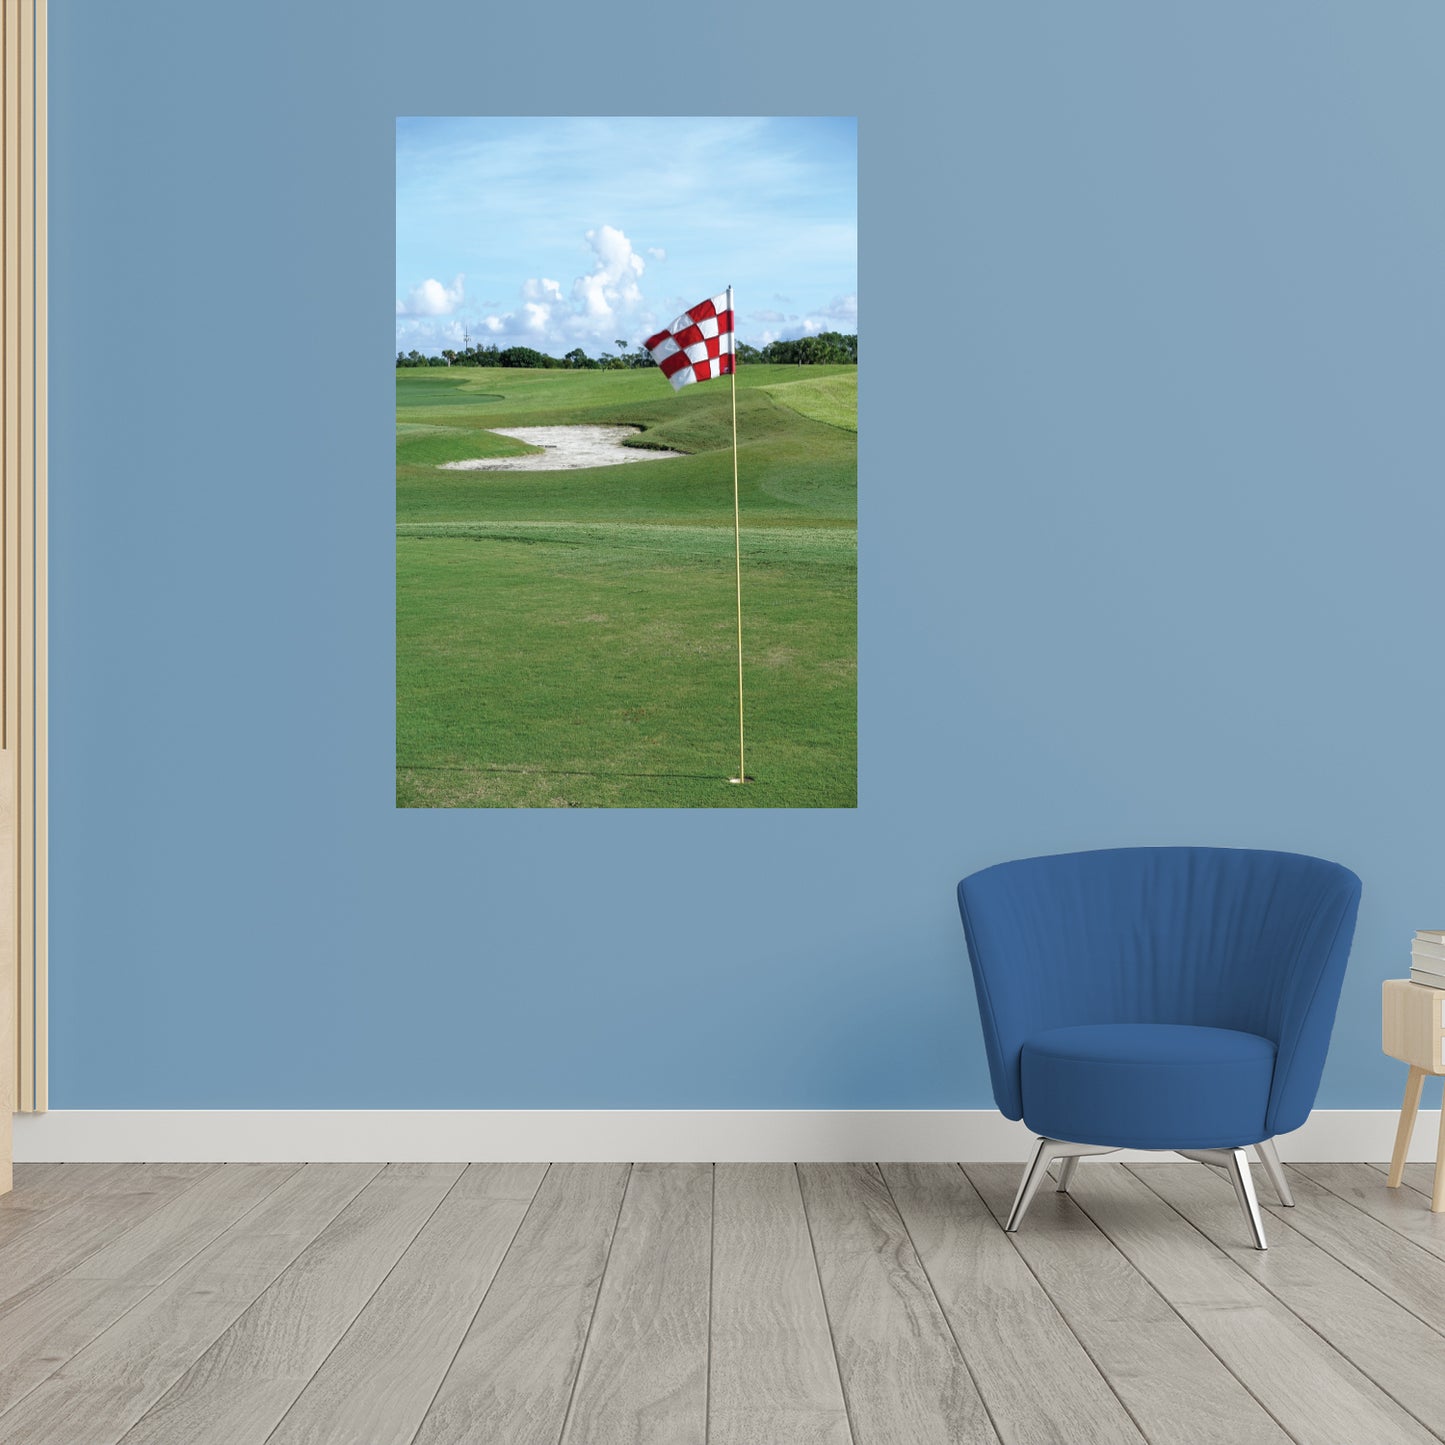 Golf:  Signal Poster        -   Removable     Adhesive Decal